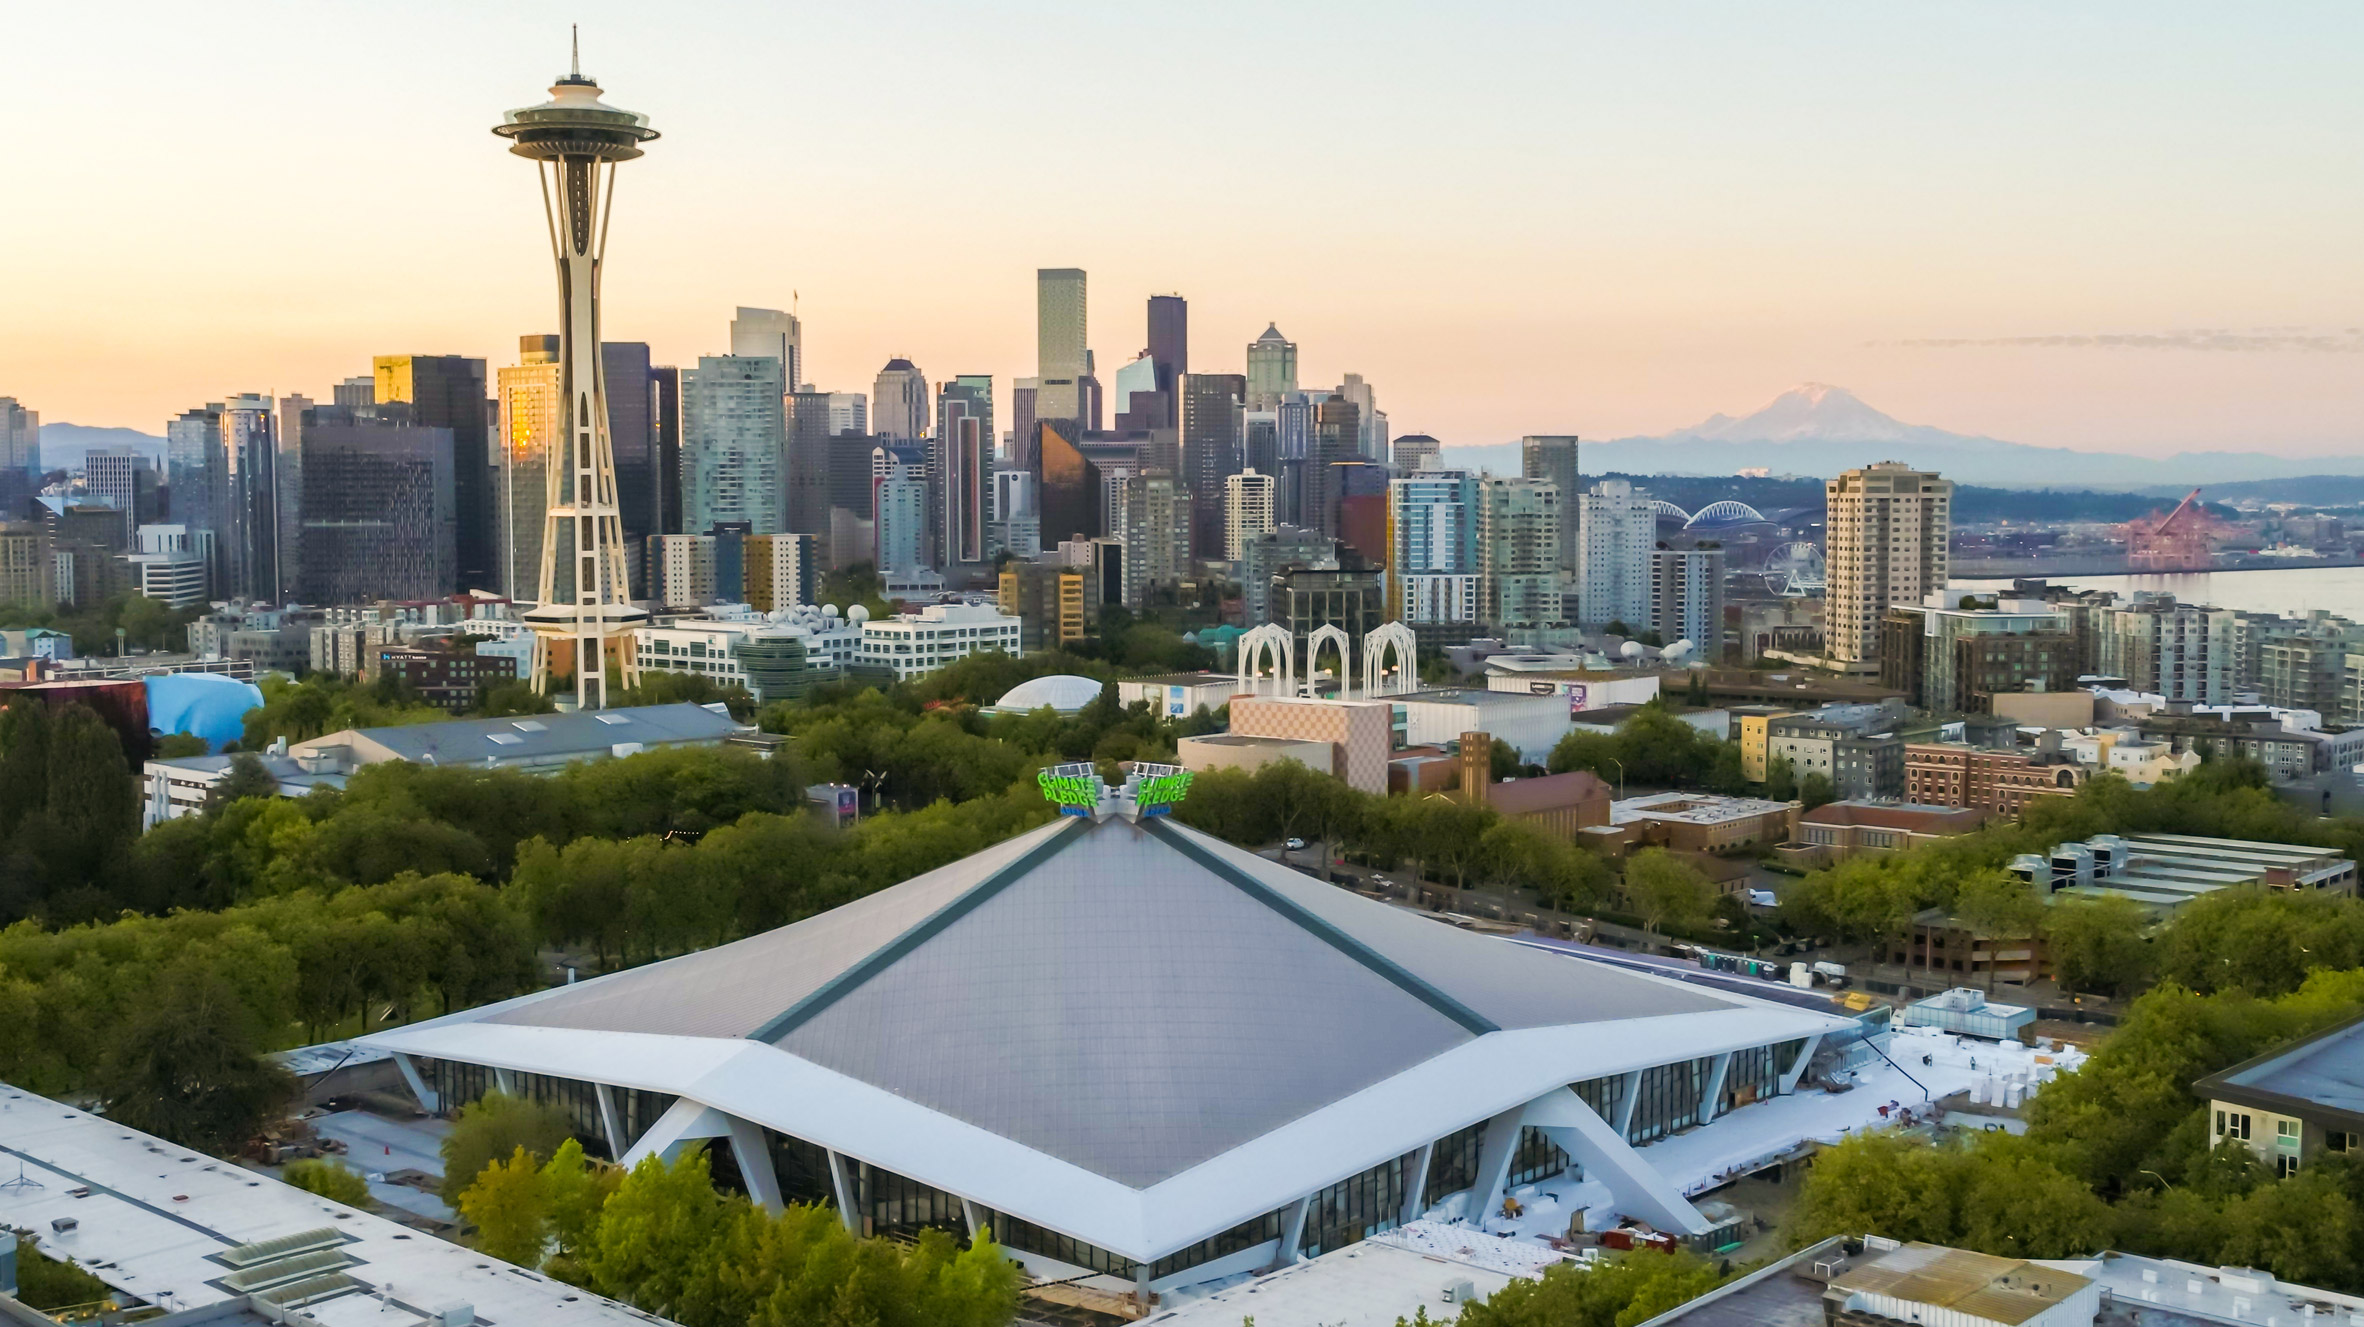 Exterior view of the Climate Pledge Arena against the Seattle skyline